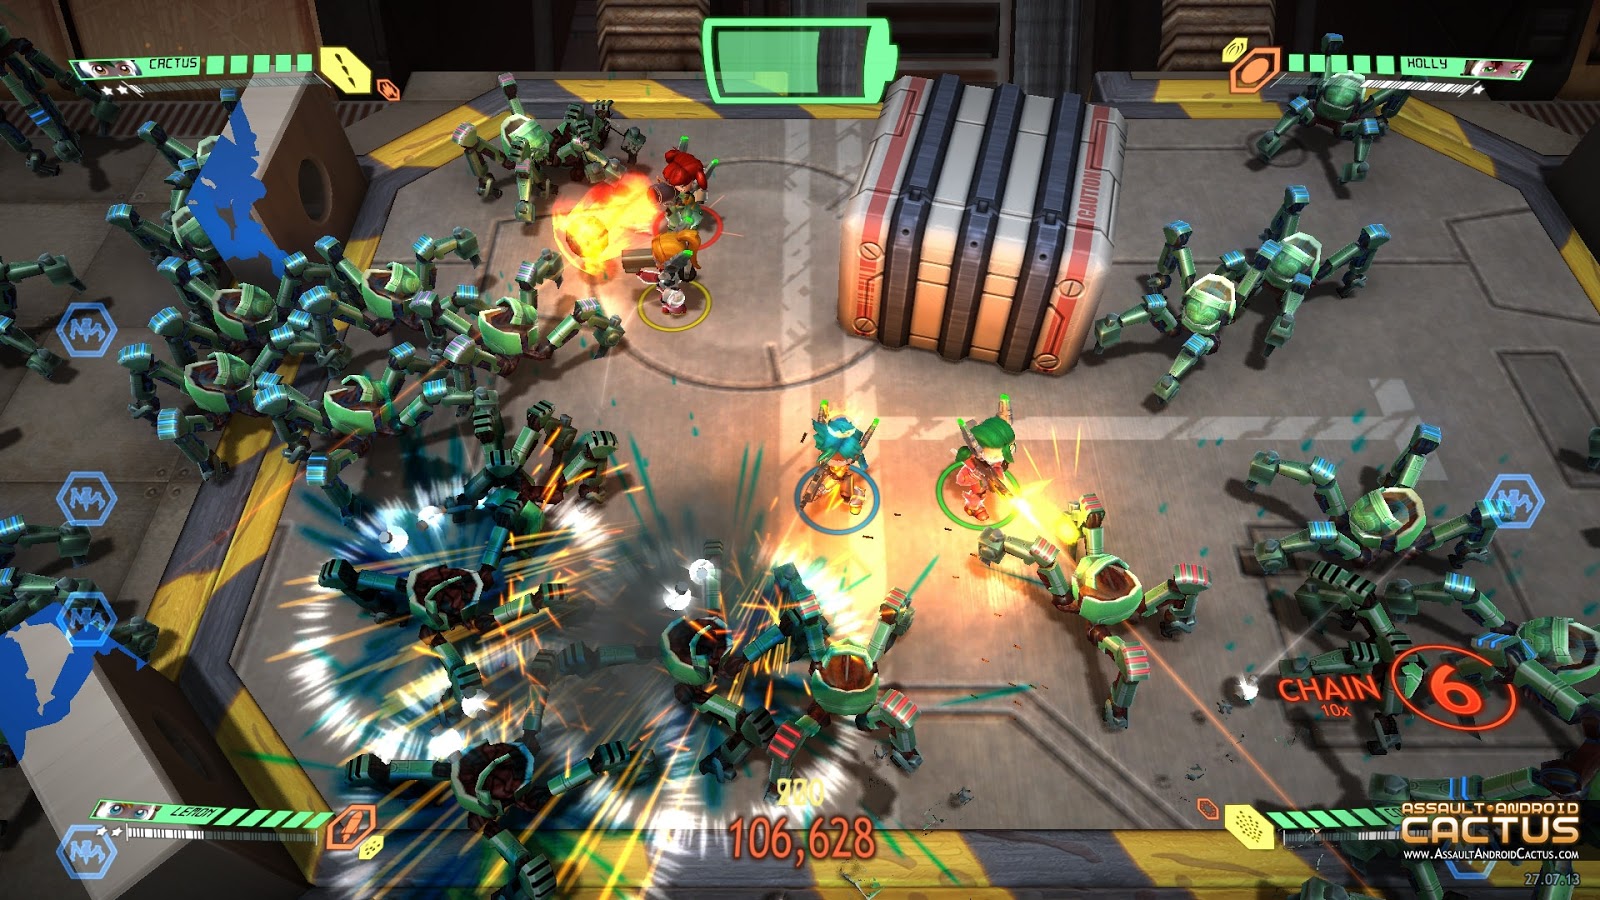 Assault Android Cactus Review Super Blasters For All — GameTyrant